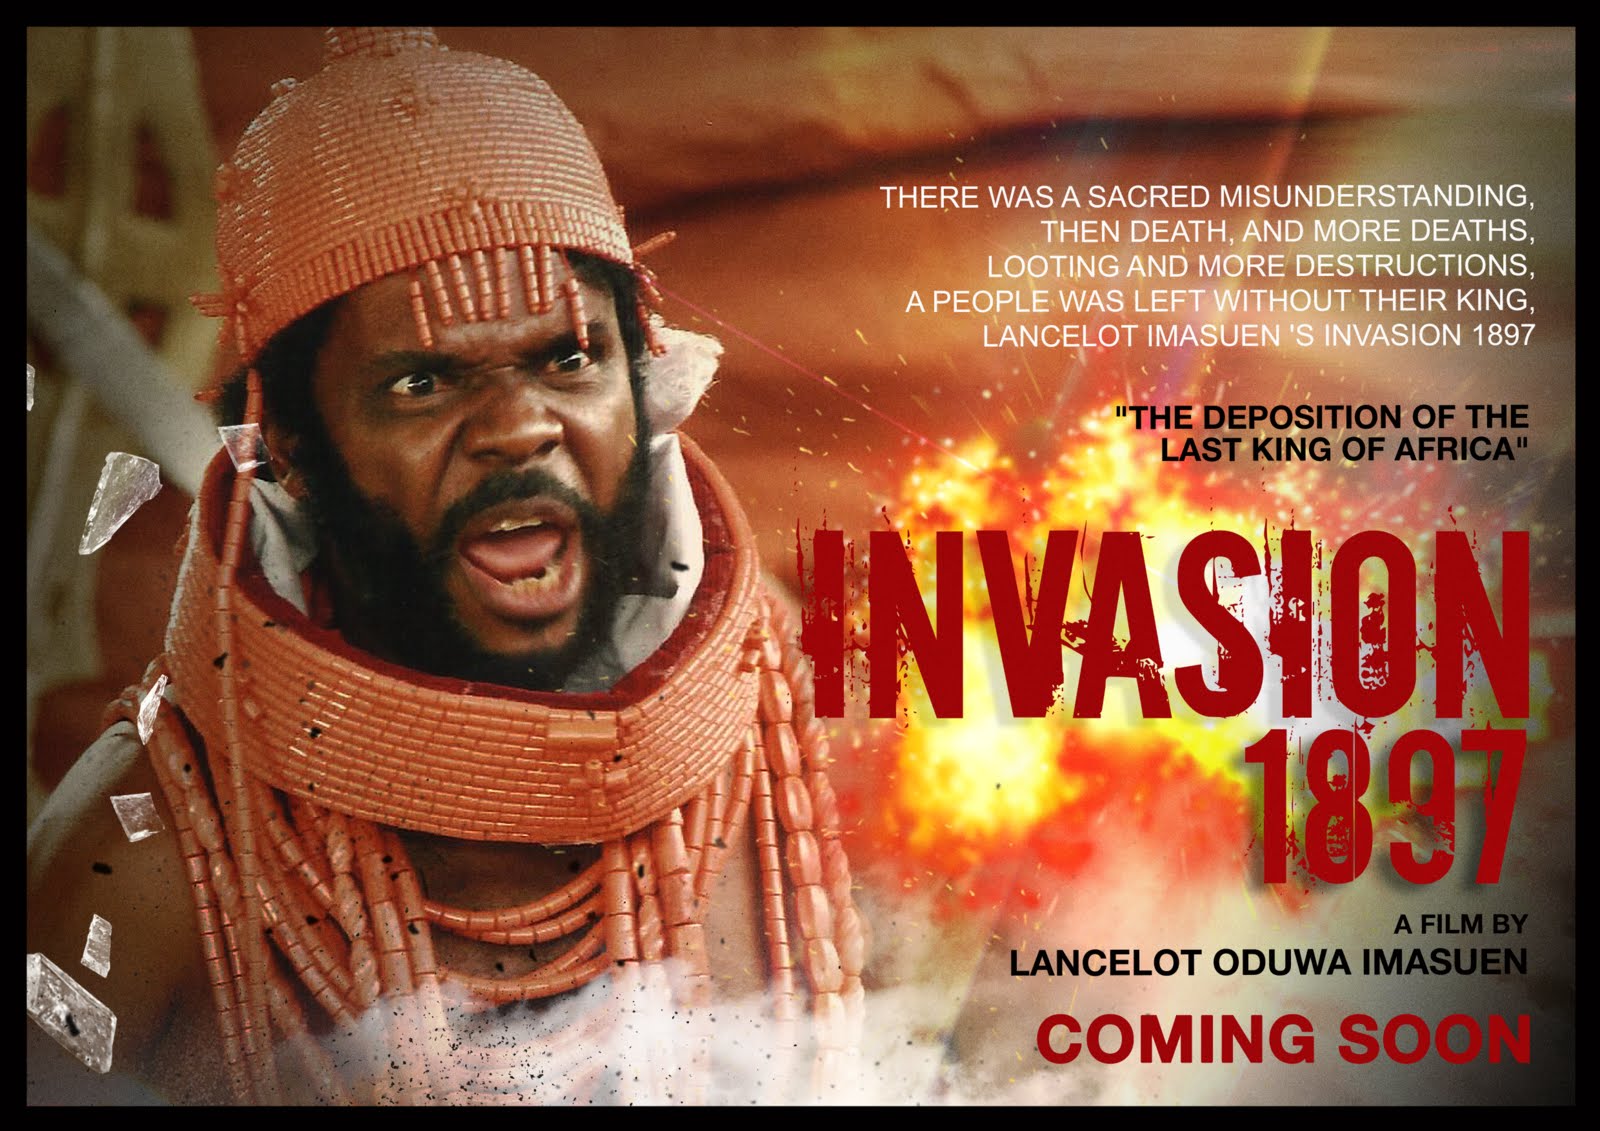 A postcard from the film 'INVASION 1897'